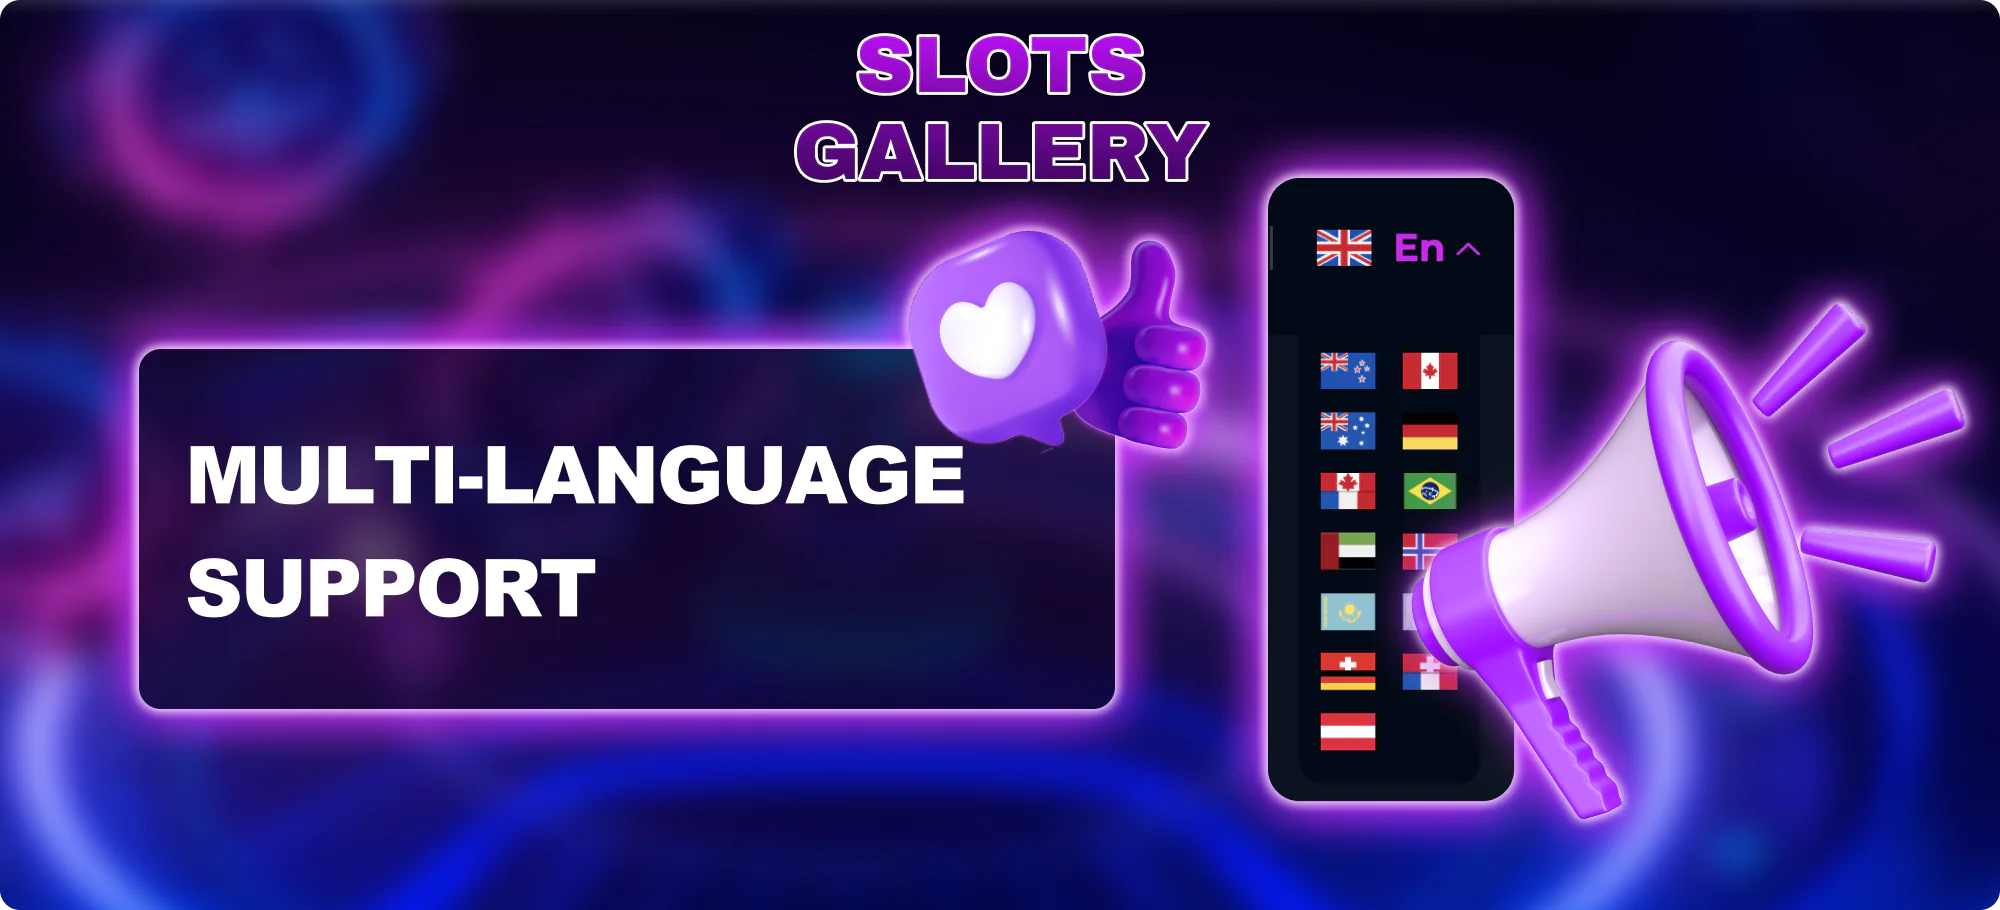 Multi-language support for Slots Gallery players via App